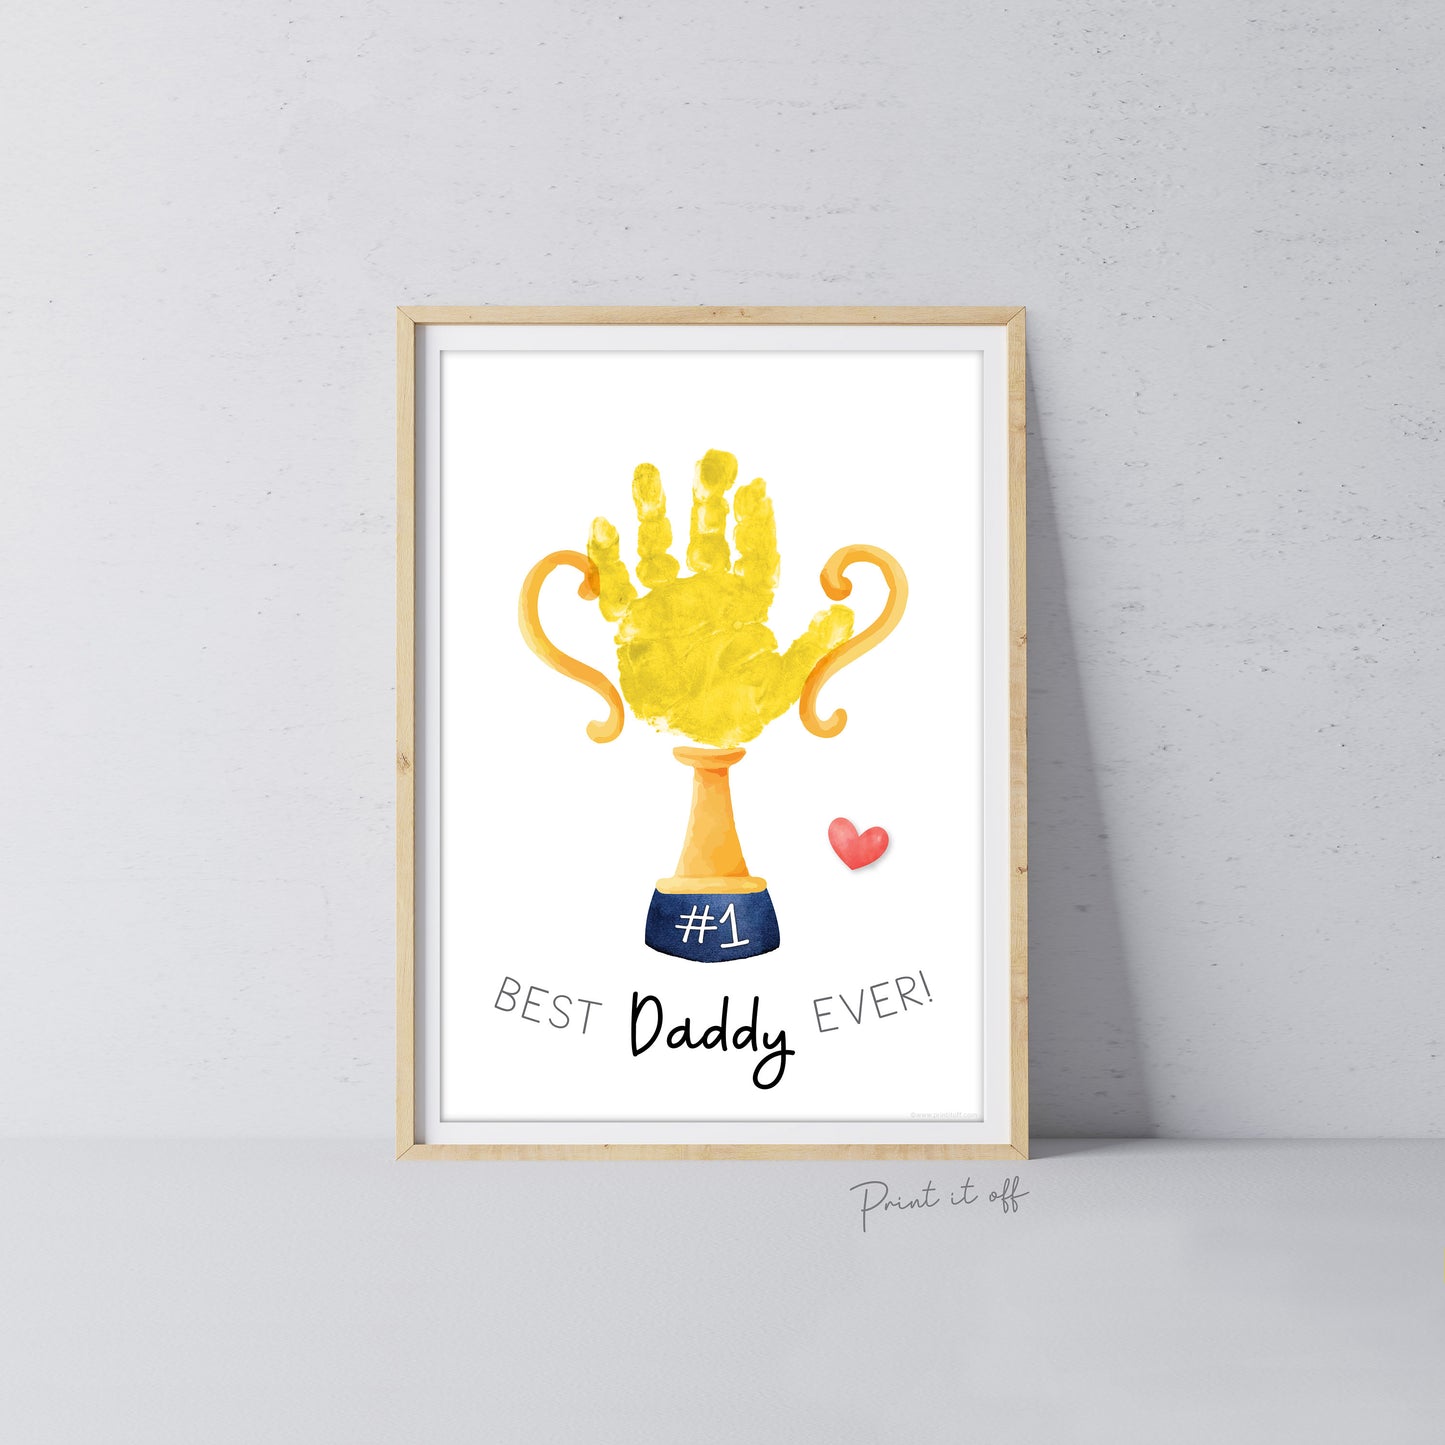 Trophy #1 Dad Daddy Handprint Art Craft / First Father's Day Award Cup / Kids Baby Child Hand / Activity Gift DIY Card / Print it off 0735